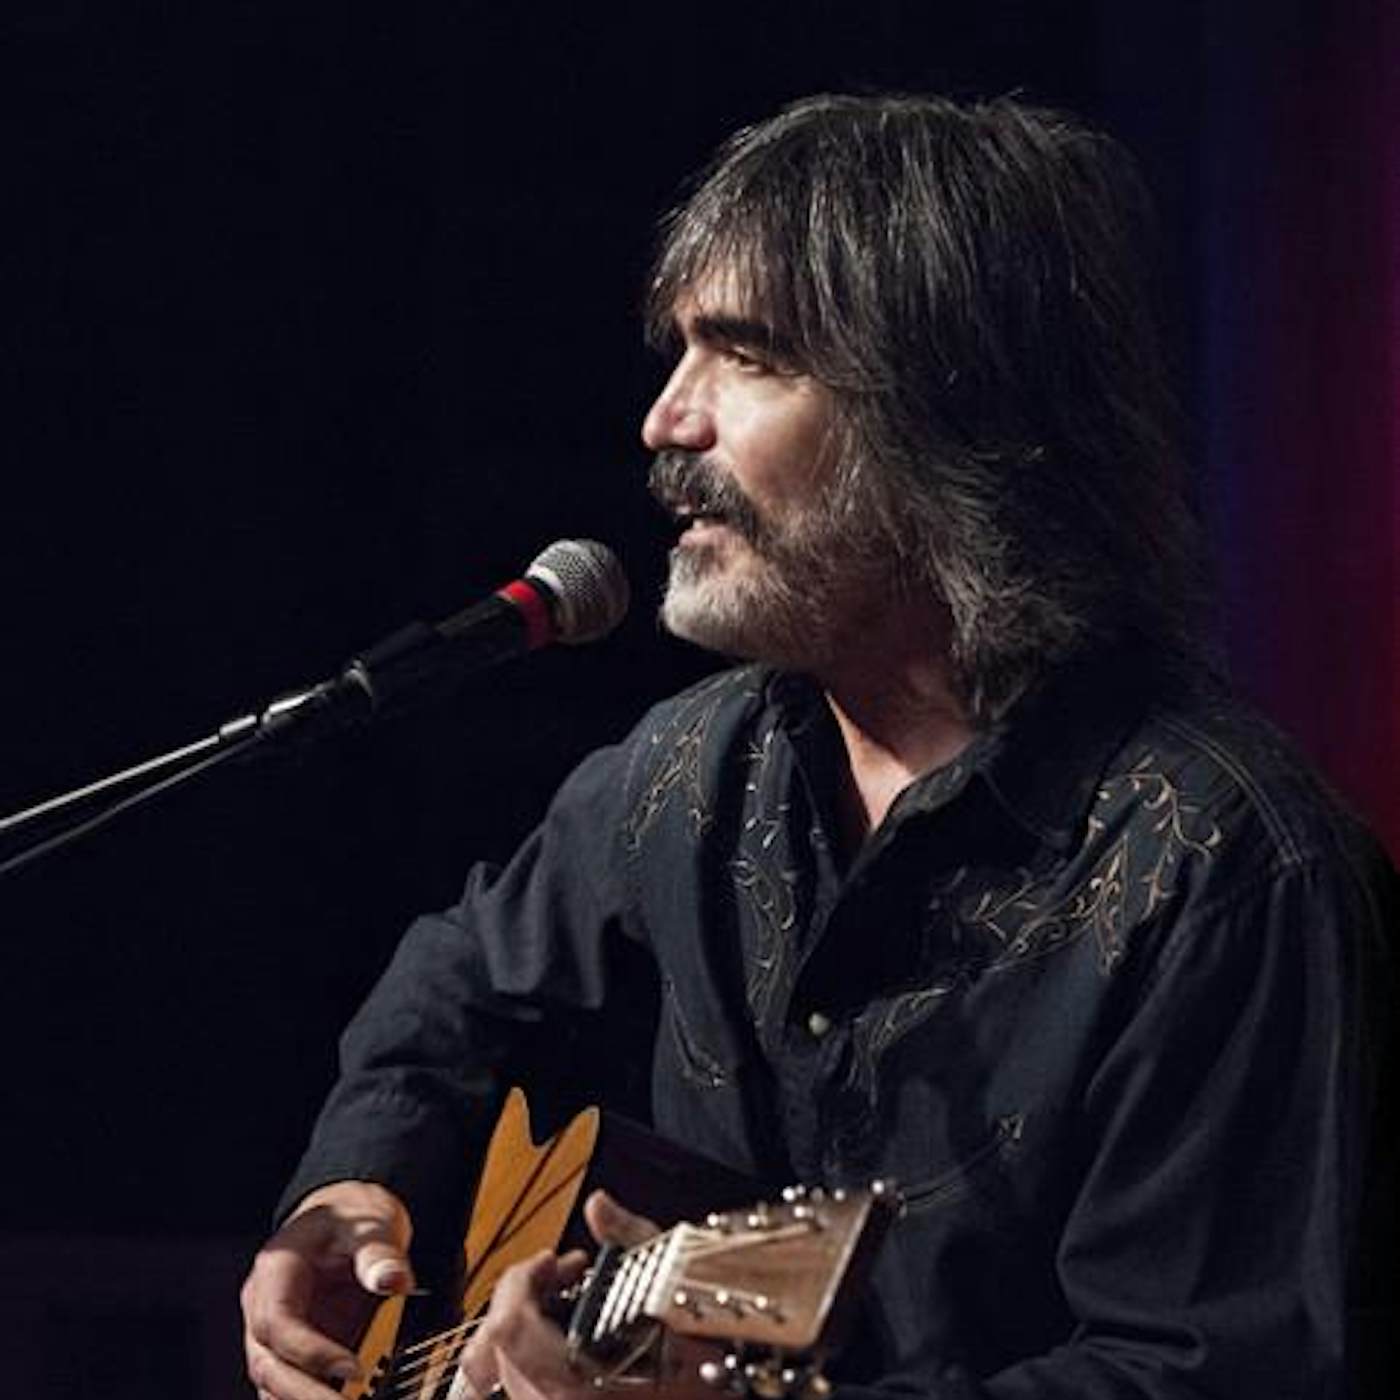 Larry Campbell